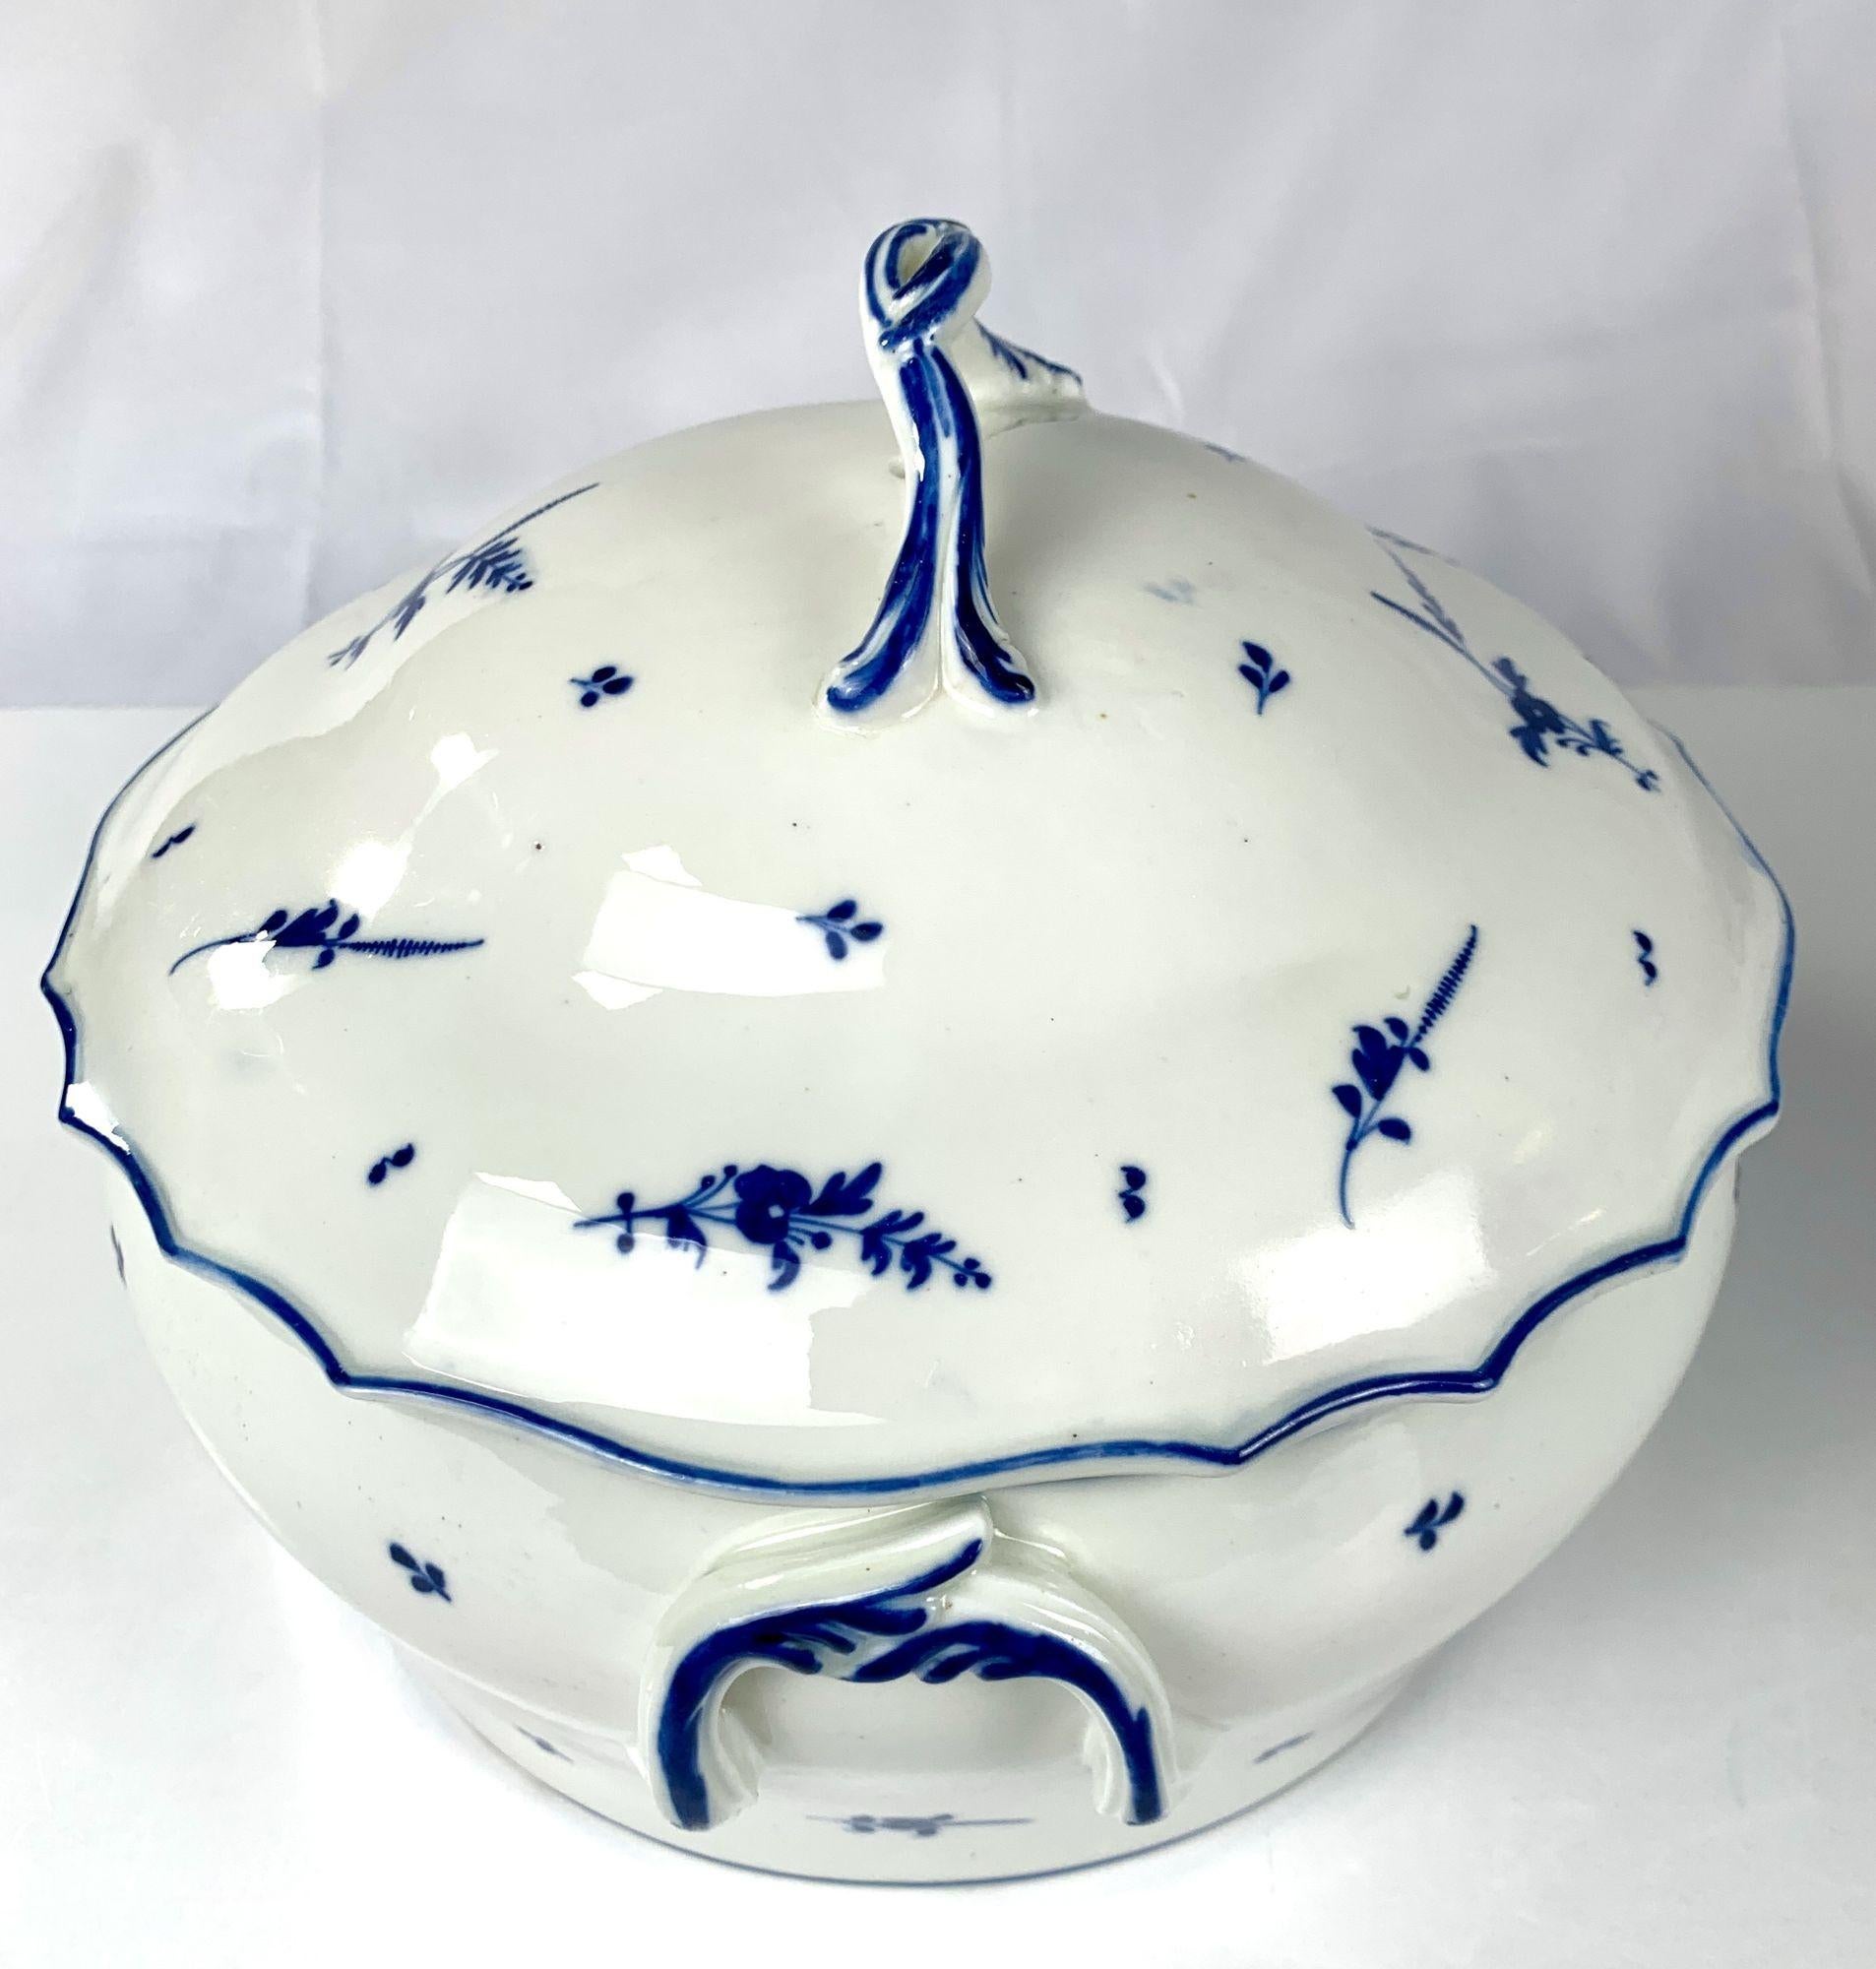 This late 18th-century French soup tureen is decorated with an elegant design of delicate cornflower sprigs.
The color of the porcelain body is creamy white. 
The cornflower sprigs, handles, and border edging are decorated with beautiful deep